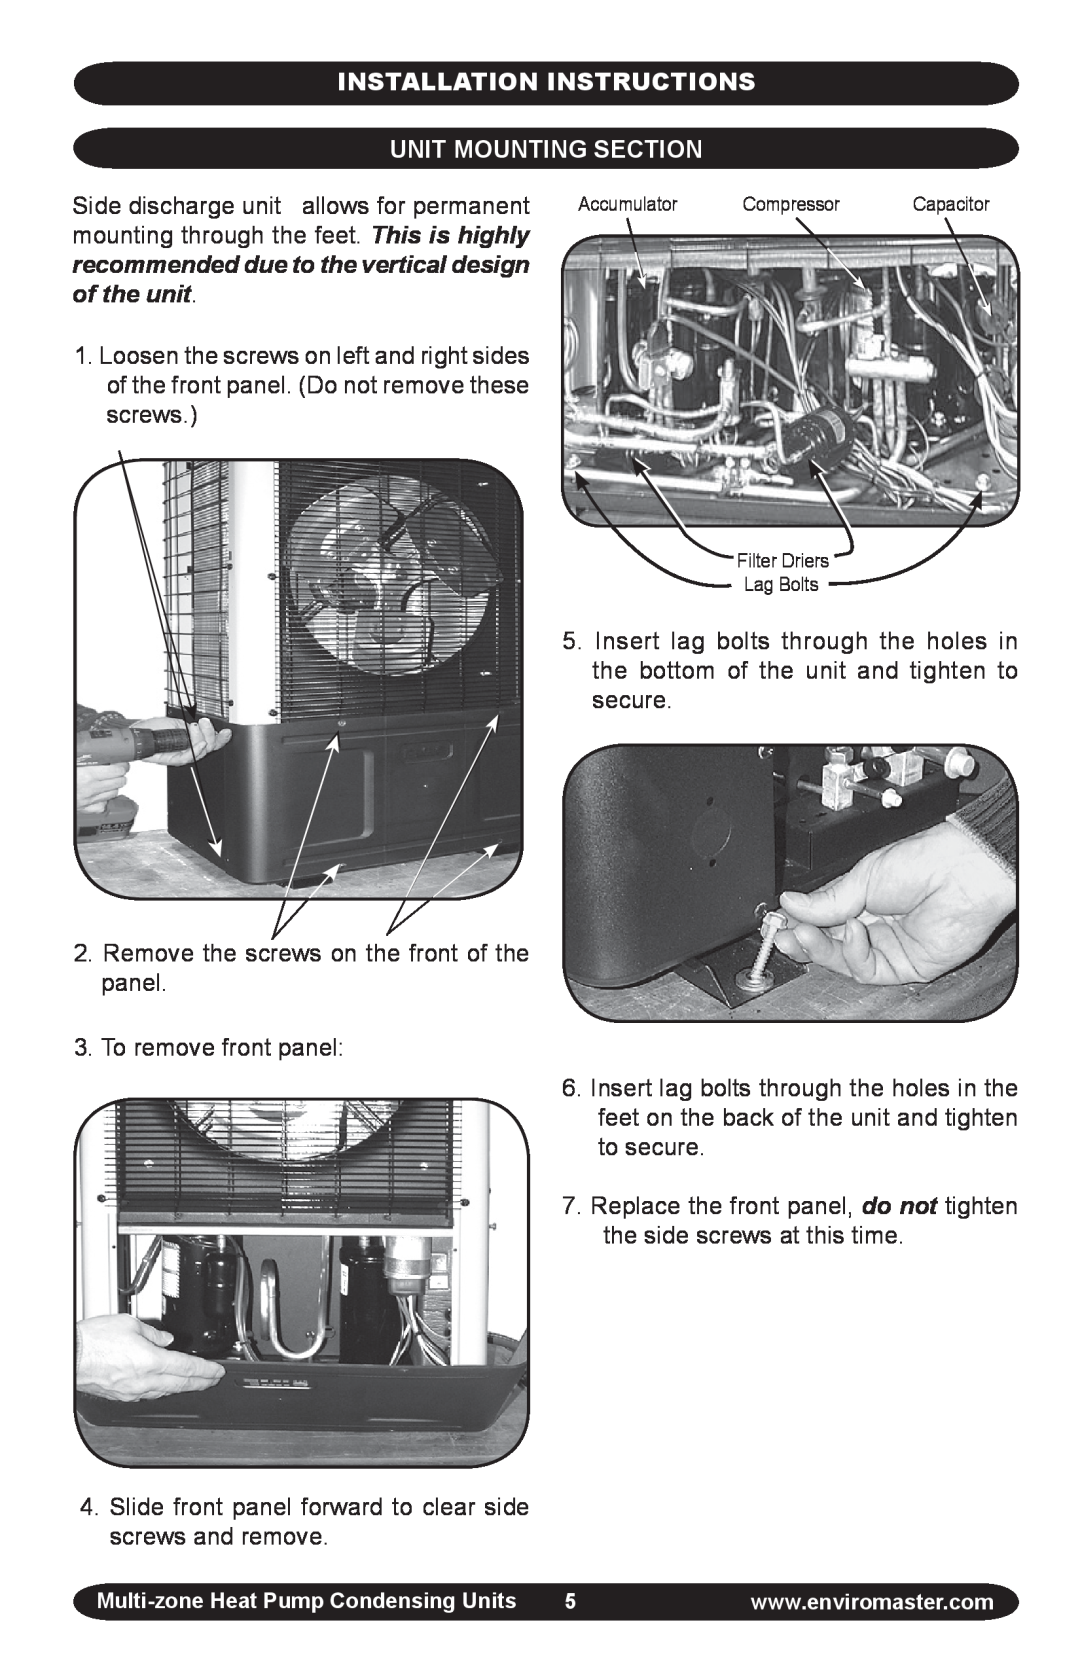 EMI EMI Corp manual Installation Instructions, Unit Mounting Section, recommended due to the vertical design, of the unit 